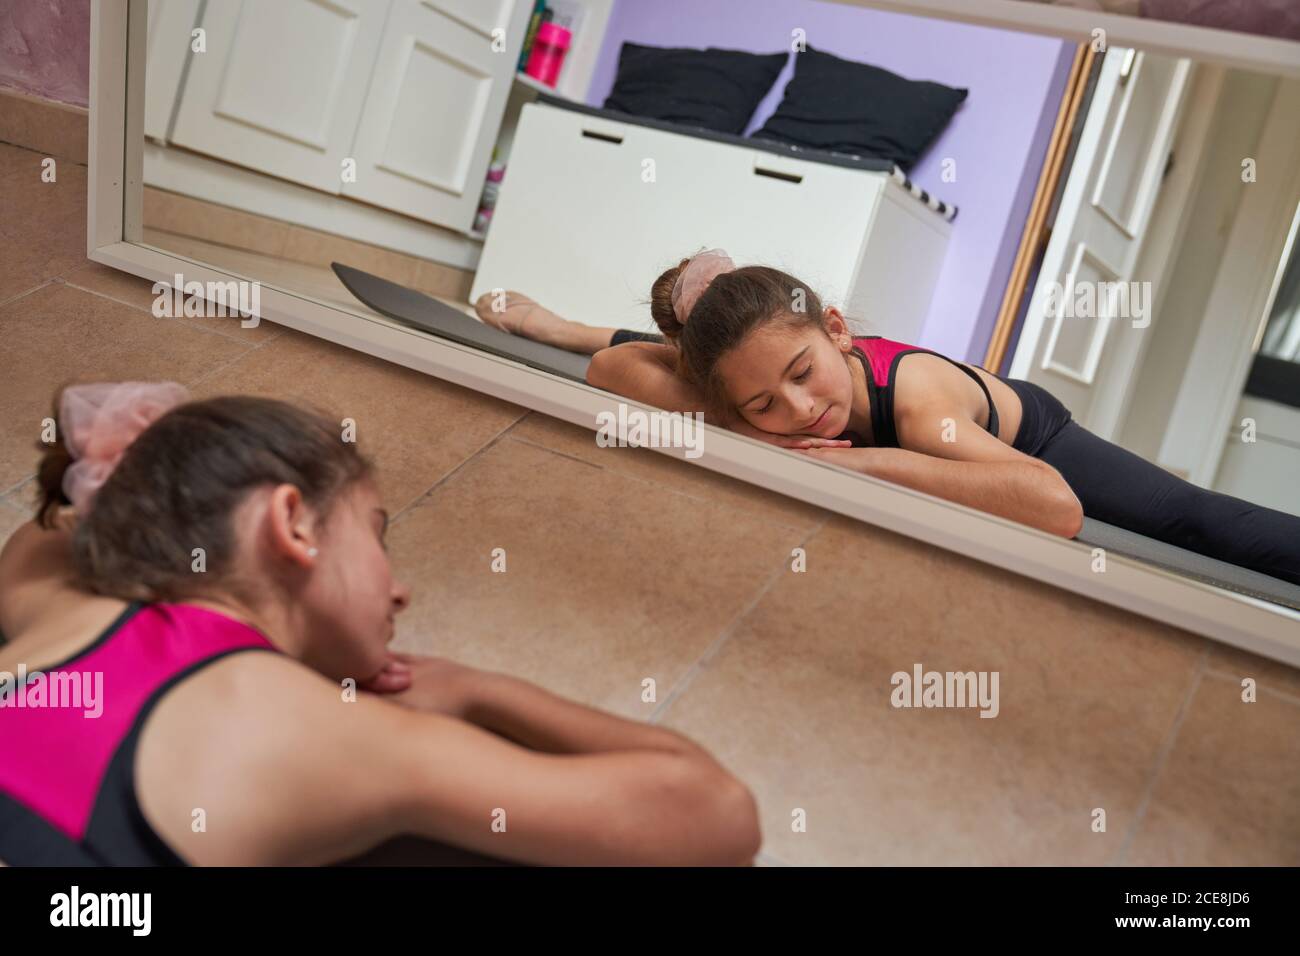 Slim teenage girl sitting on mat doing splits with closed eyes practicing gymnastics in front of mirror Stock Photo